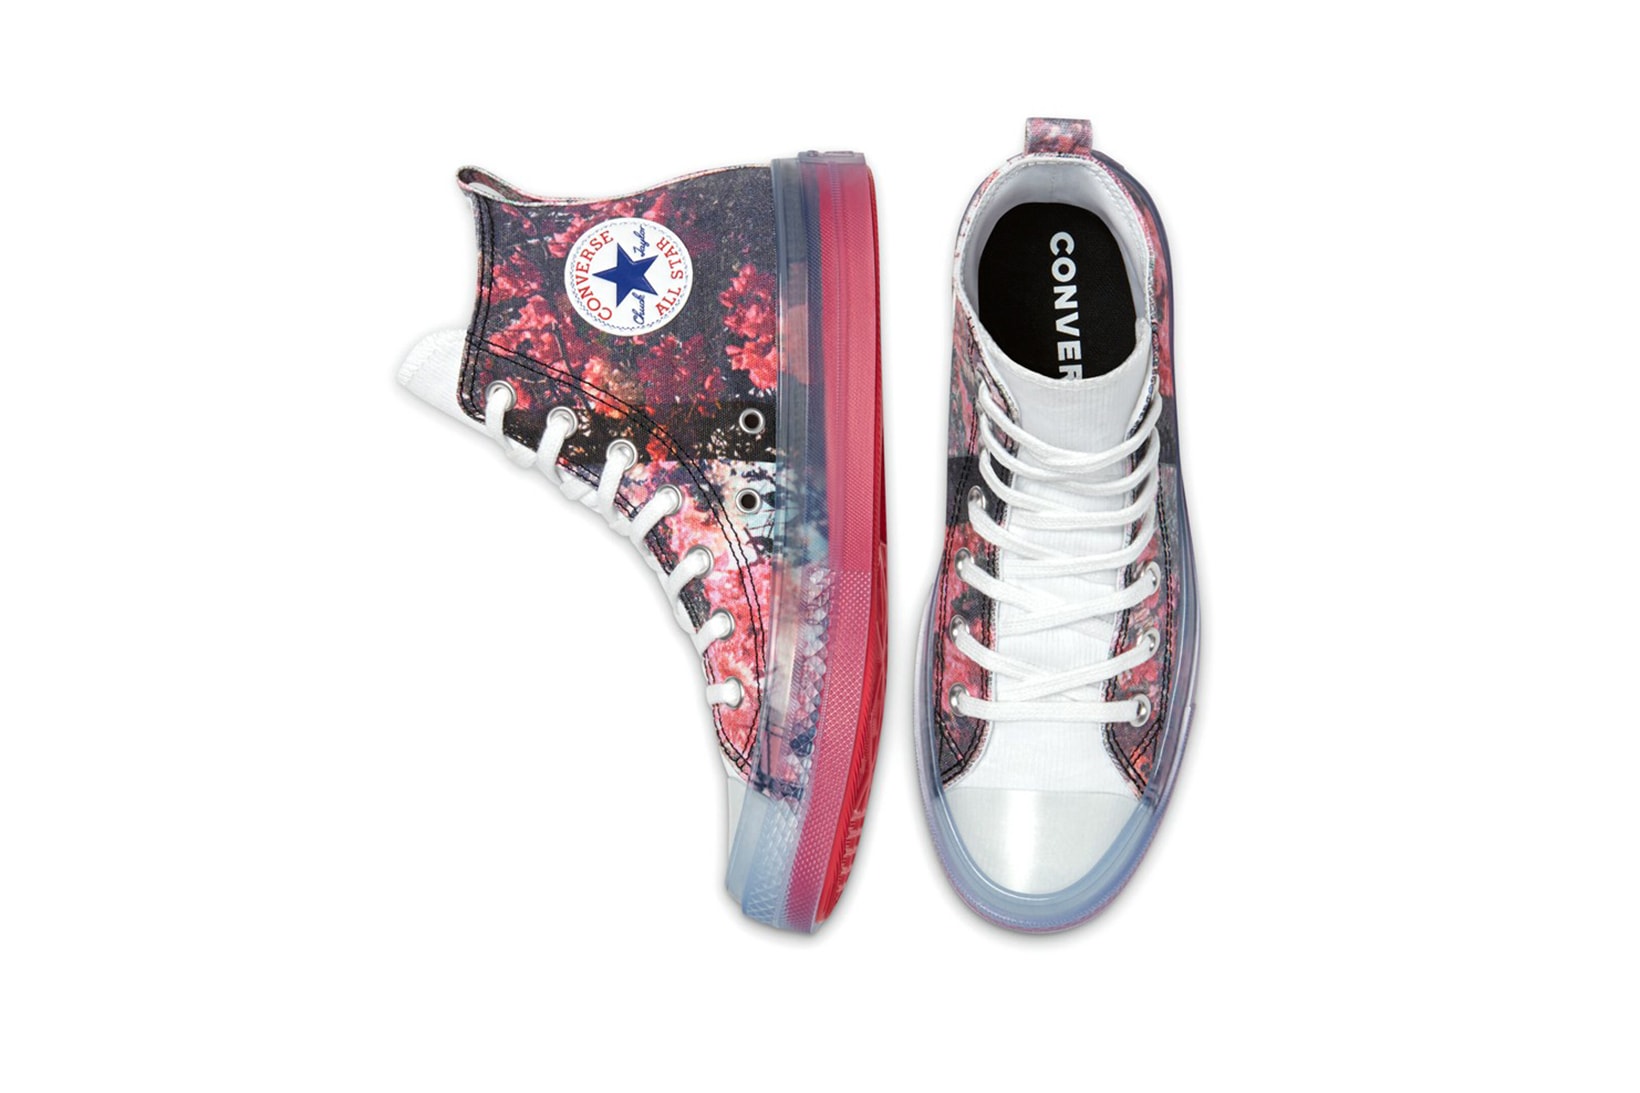 converse shaniqwa jarvis collaboration chuck taylor all star cx sneakers pink purple blue white colorway sneakerhead footwear shoes